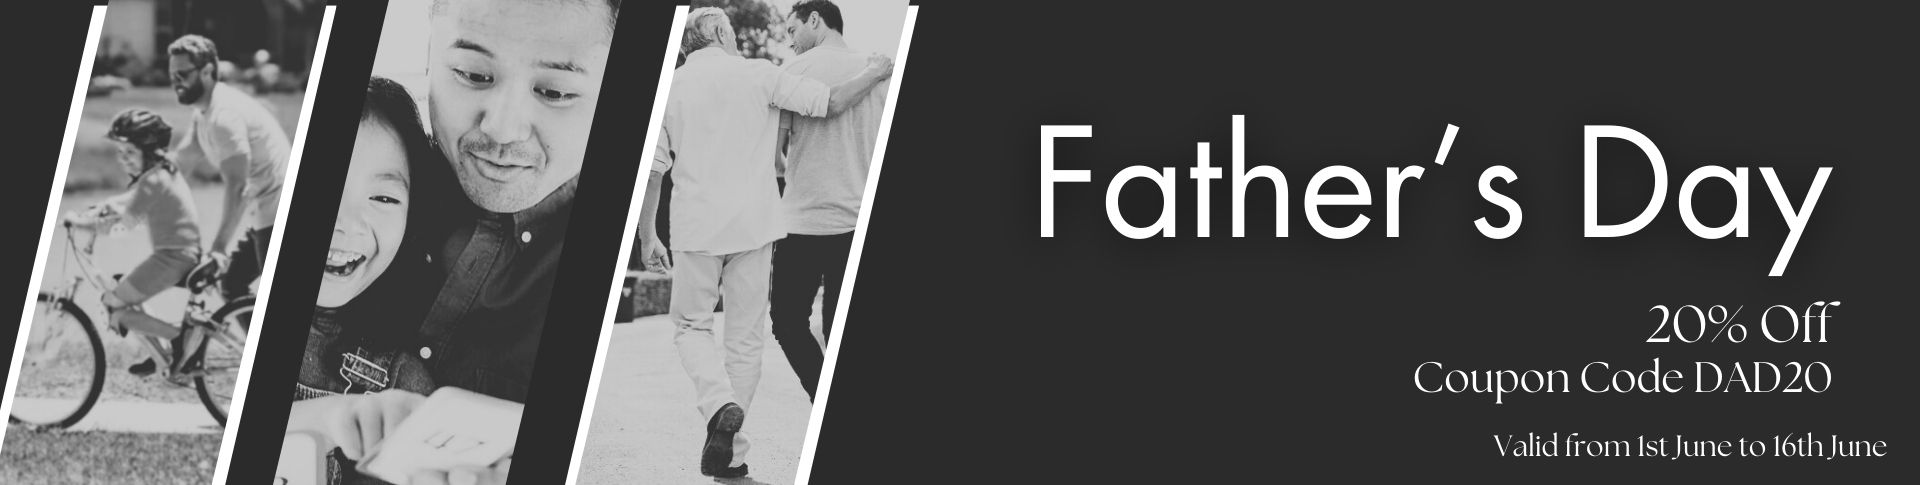 Fathers day banner